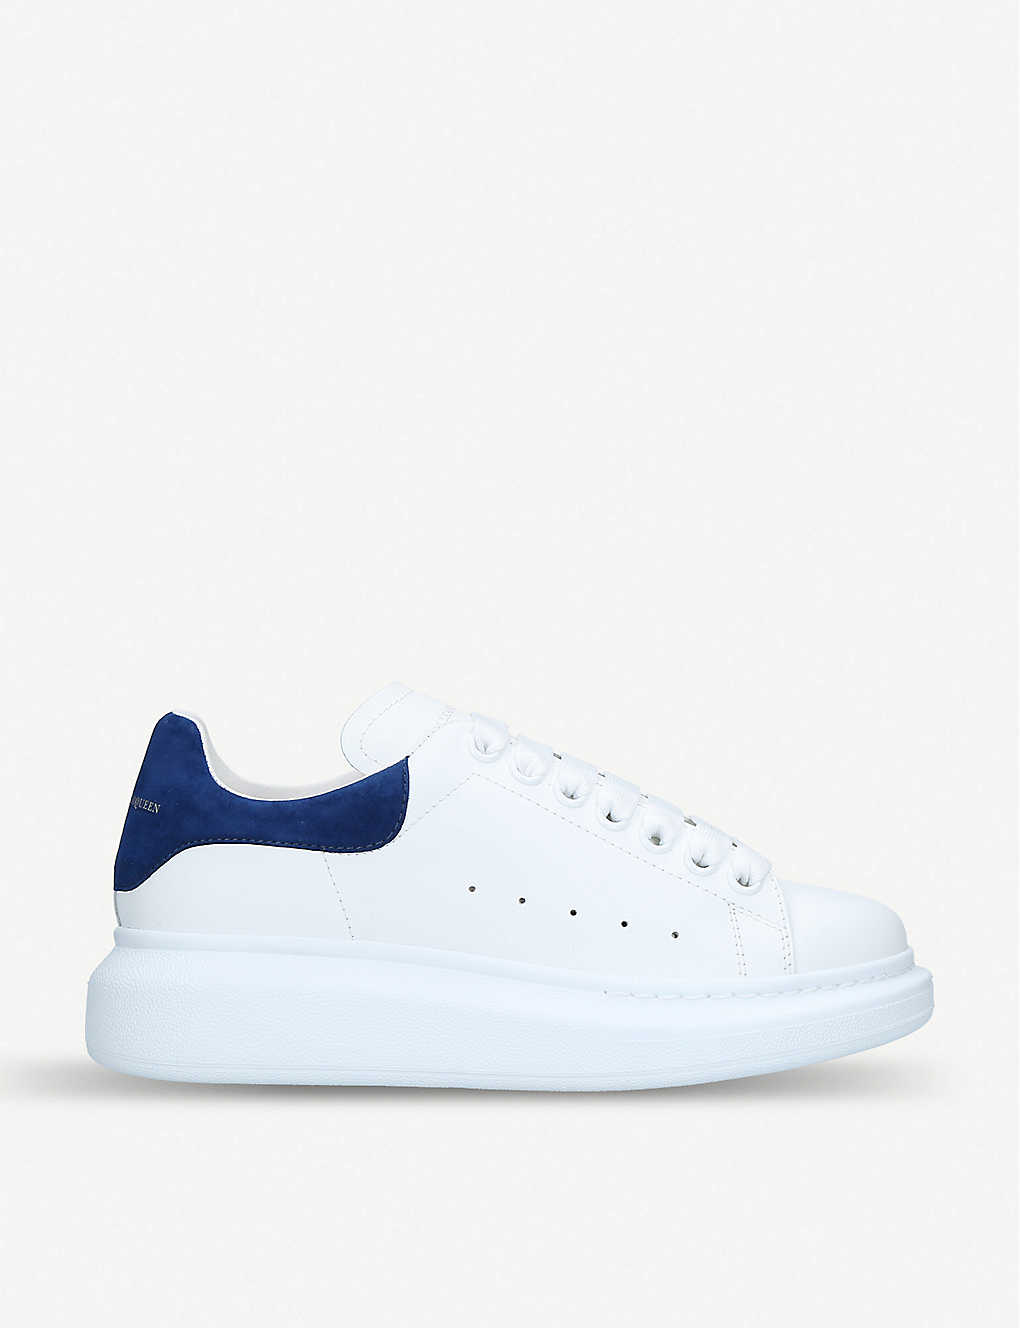 Alexander Mcqueen Women's Show Leather Platform Trainers In Blue Other